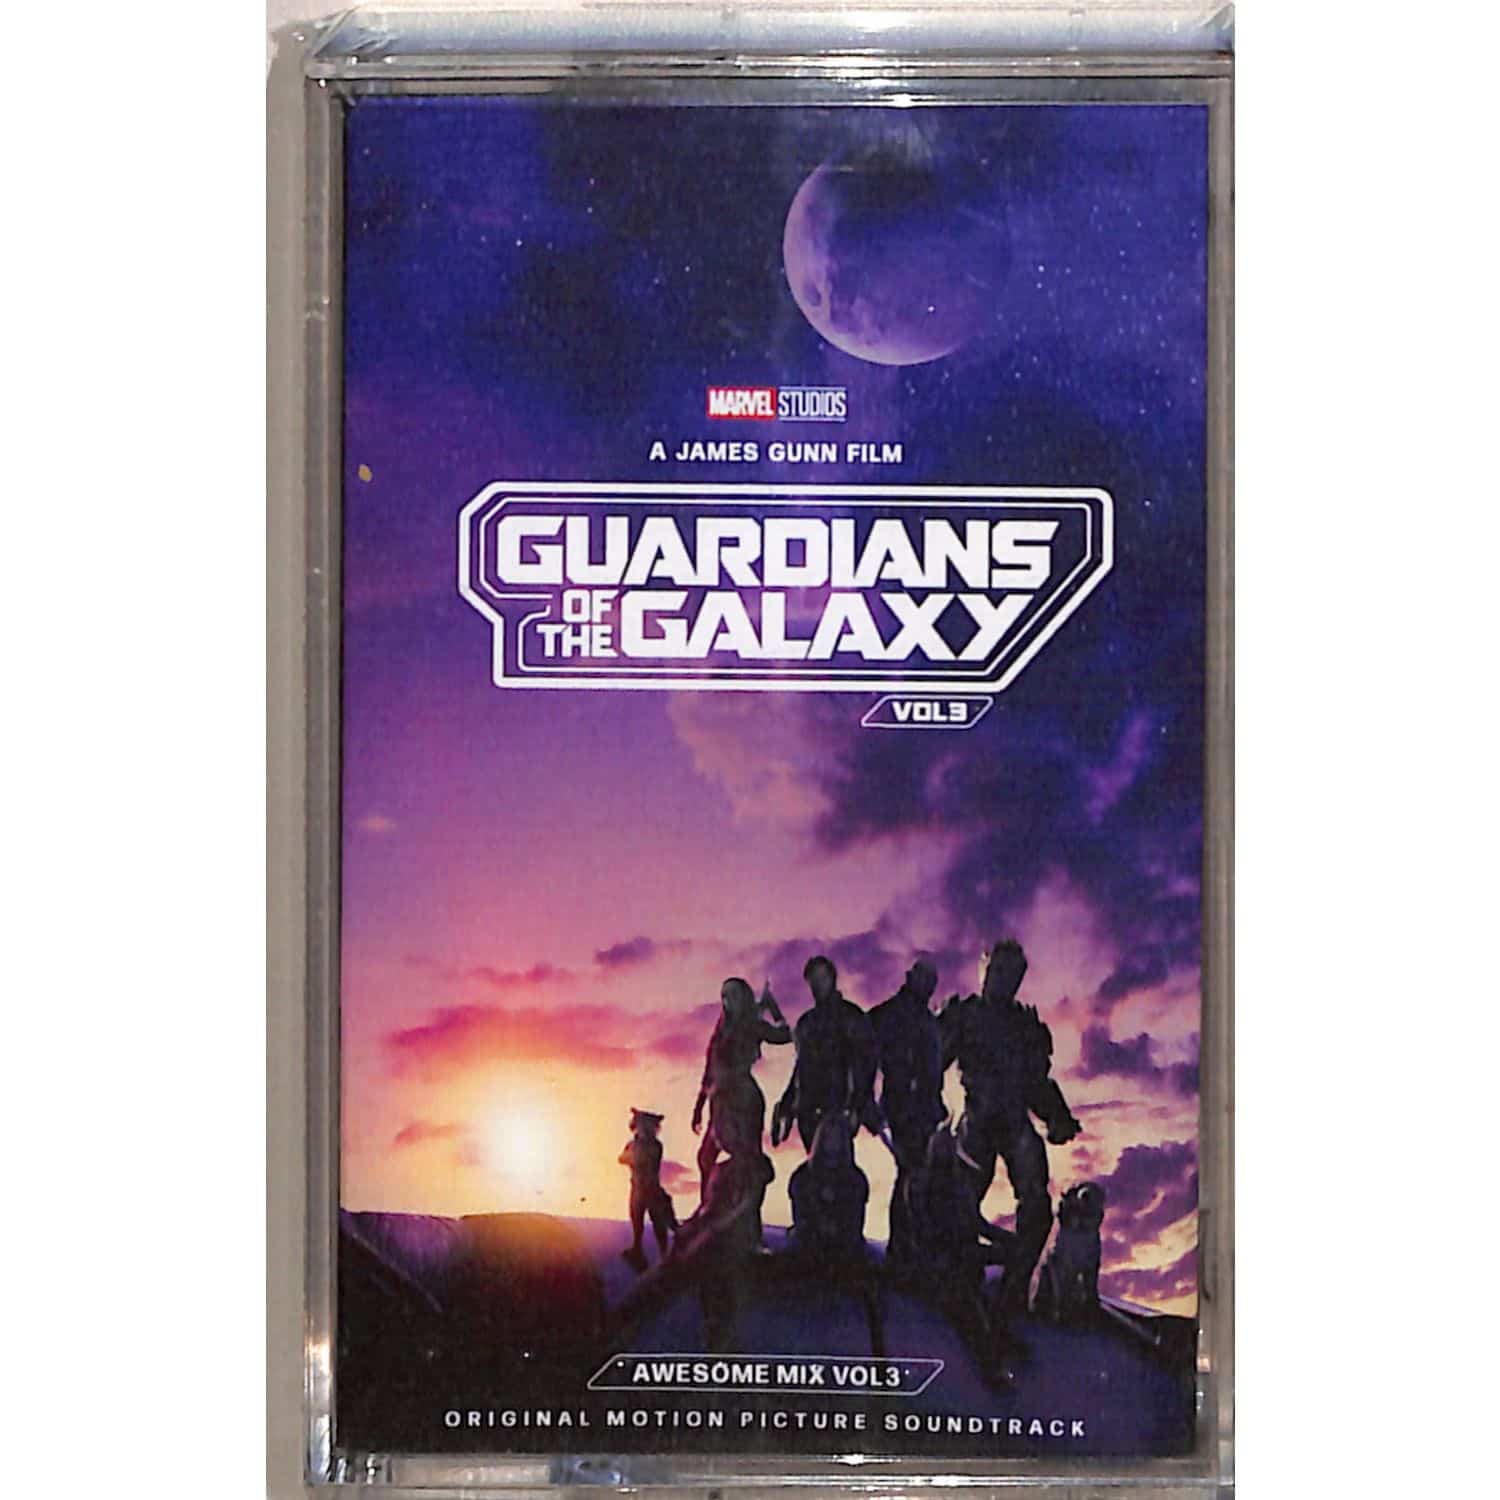 V/a - GUARDIANS OF THE GALAXY VOL3 AWESOME MIX VOL3 